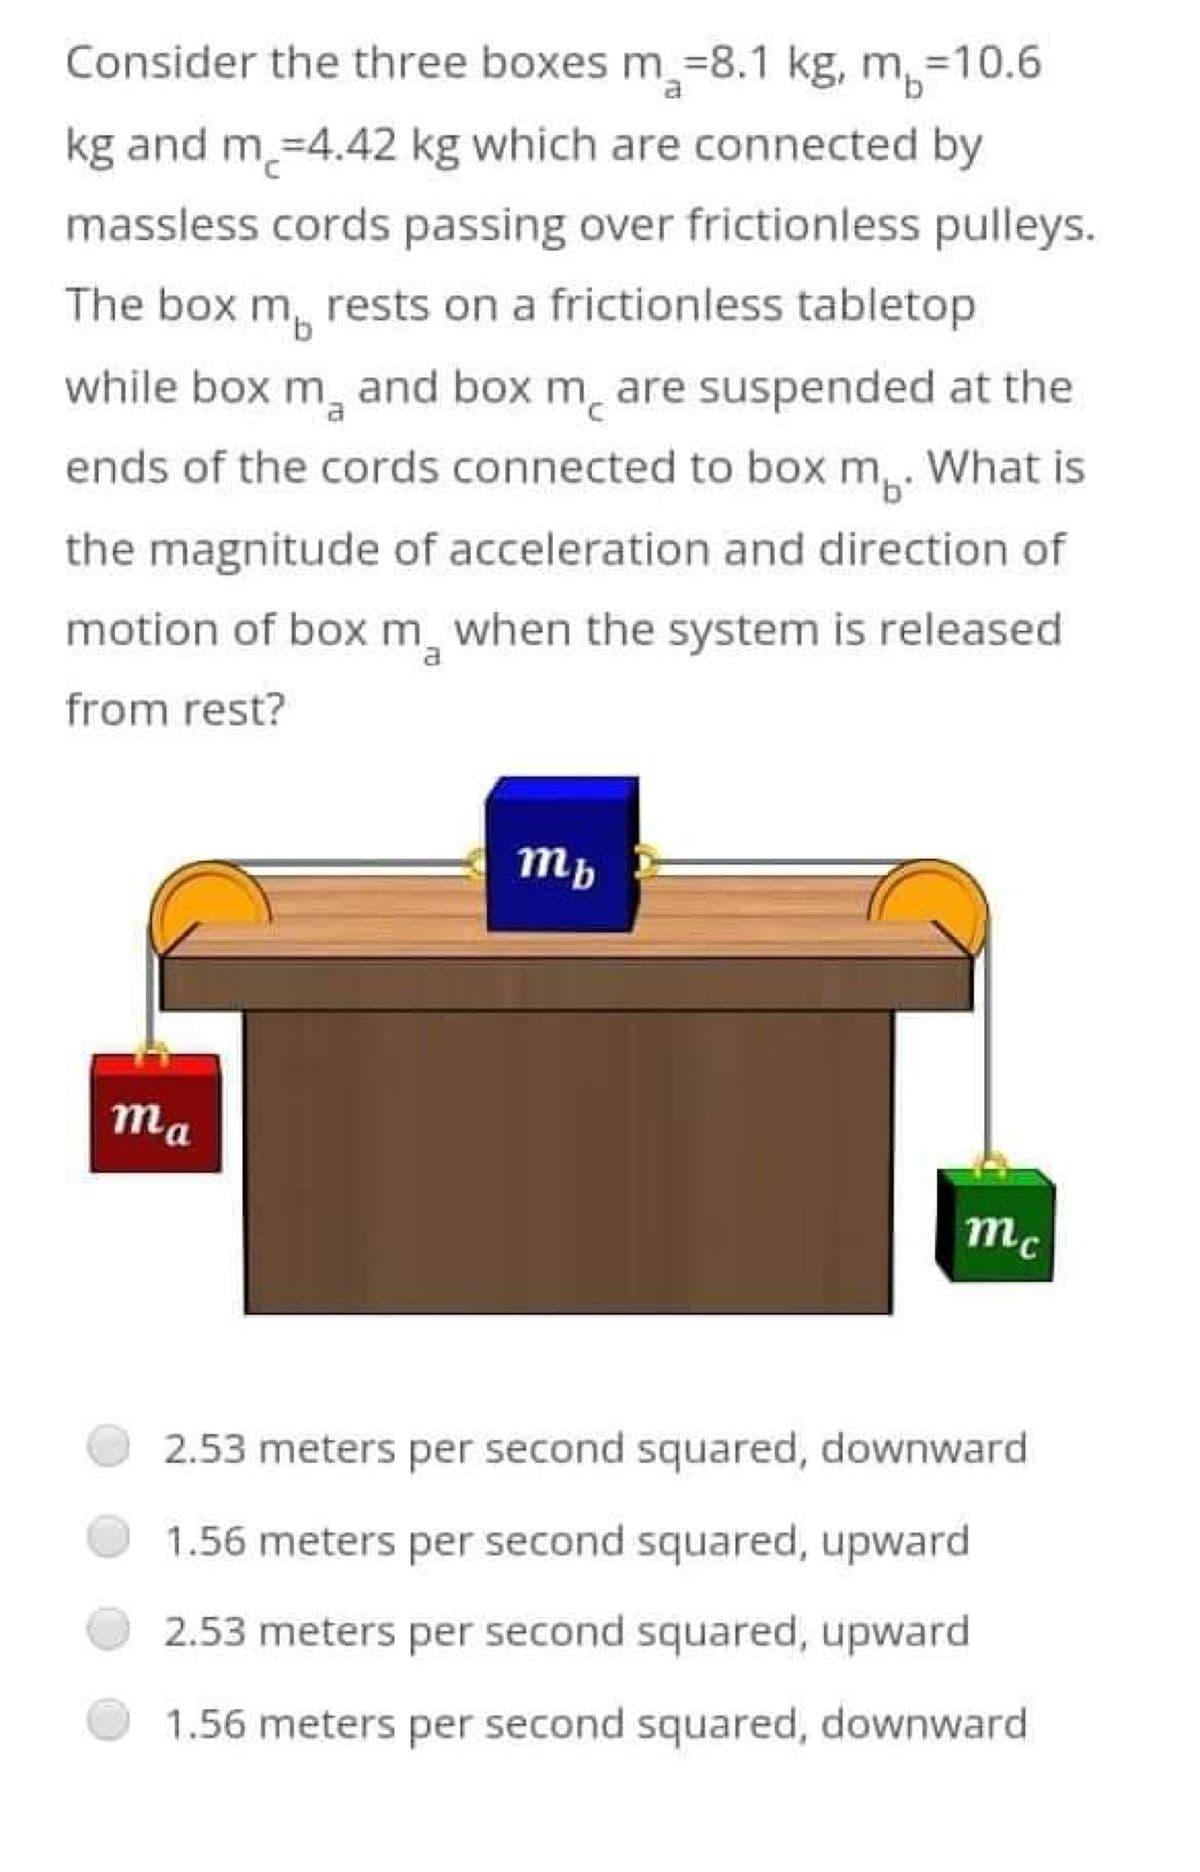 Consider the three boxes m-8.1 kg, m=10.6
kg and m =4.42 kg which are connected by
massless cords passing over frictionless pulleys.
The box m, rests on a frictionless tabletop
while box m₂ and box mare suspended at the
ends of the cords connected to box m. What is
the magnitude of acceleration and direction of
motion of box m when the system is released
from rest?
mb
ma
mc
2.53 meters per second squared, downward
1.56 meters per second squared, upward
2.53 meters per second squared, upward
1.56 meters per second squared, downward